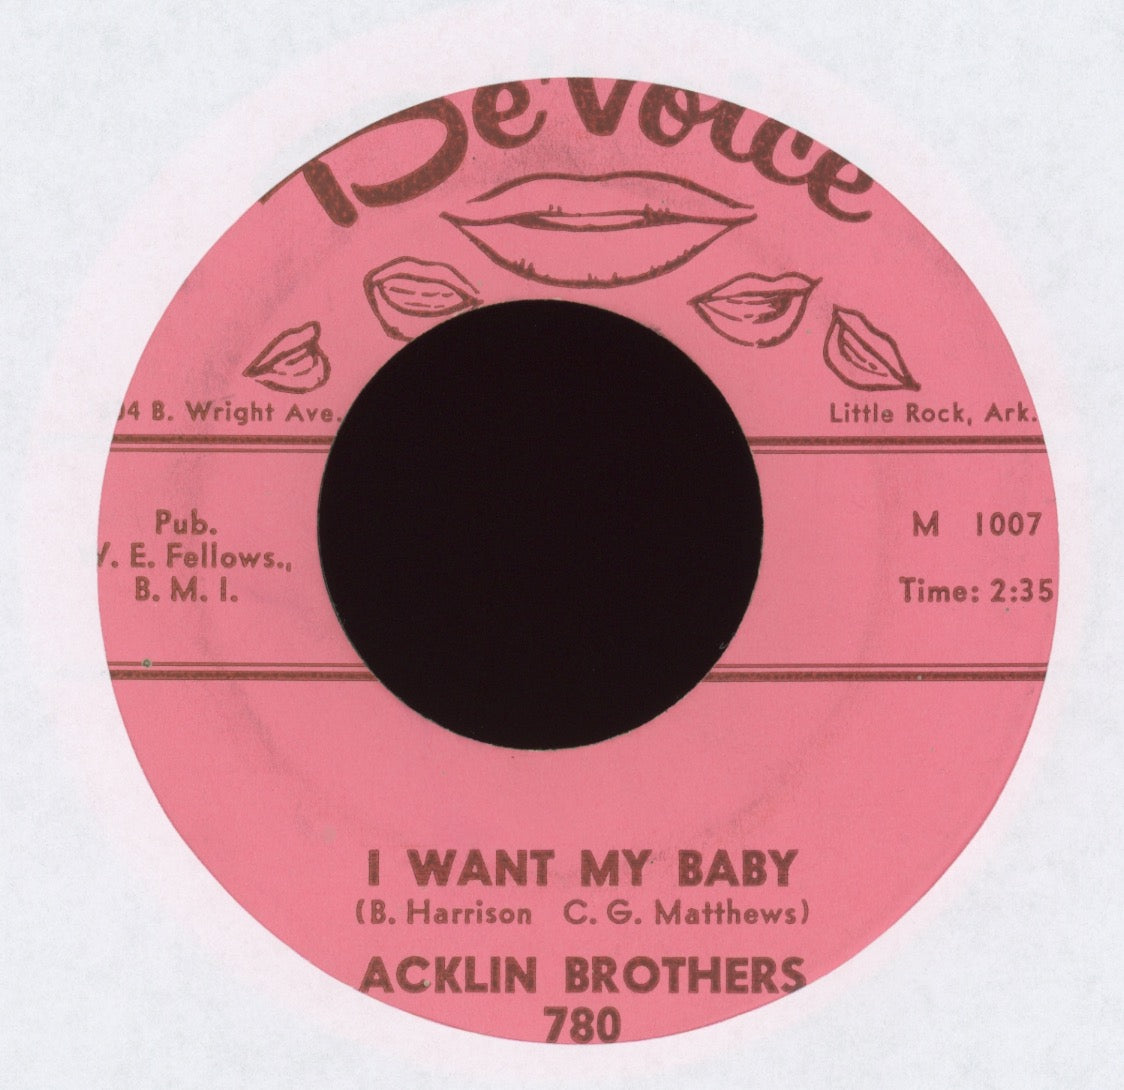 Acklin Brothers - Junior's Angle on De'Voice